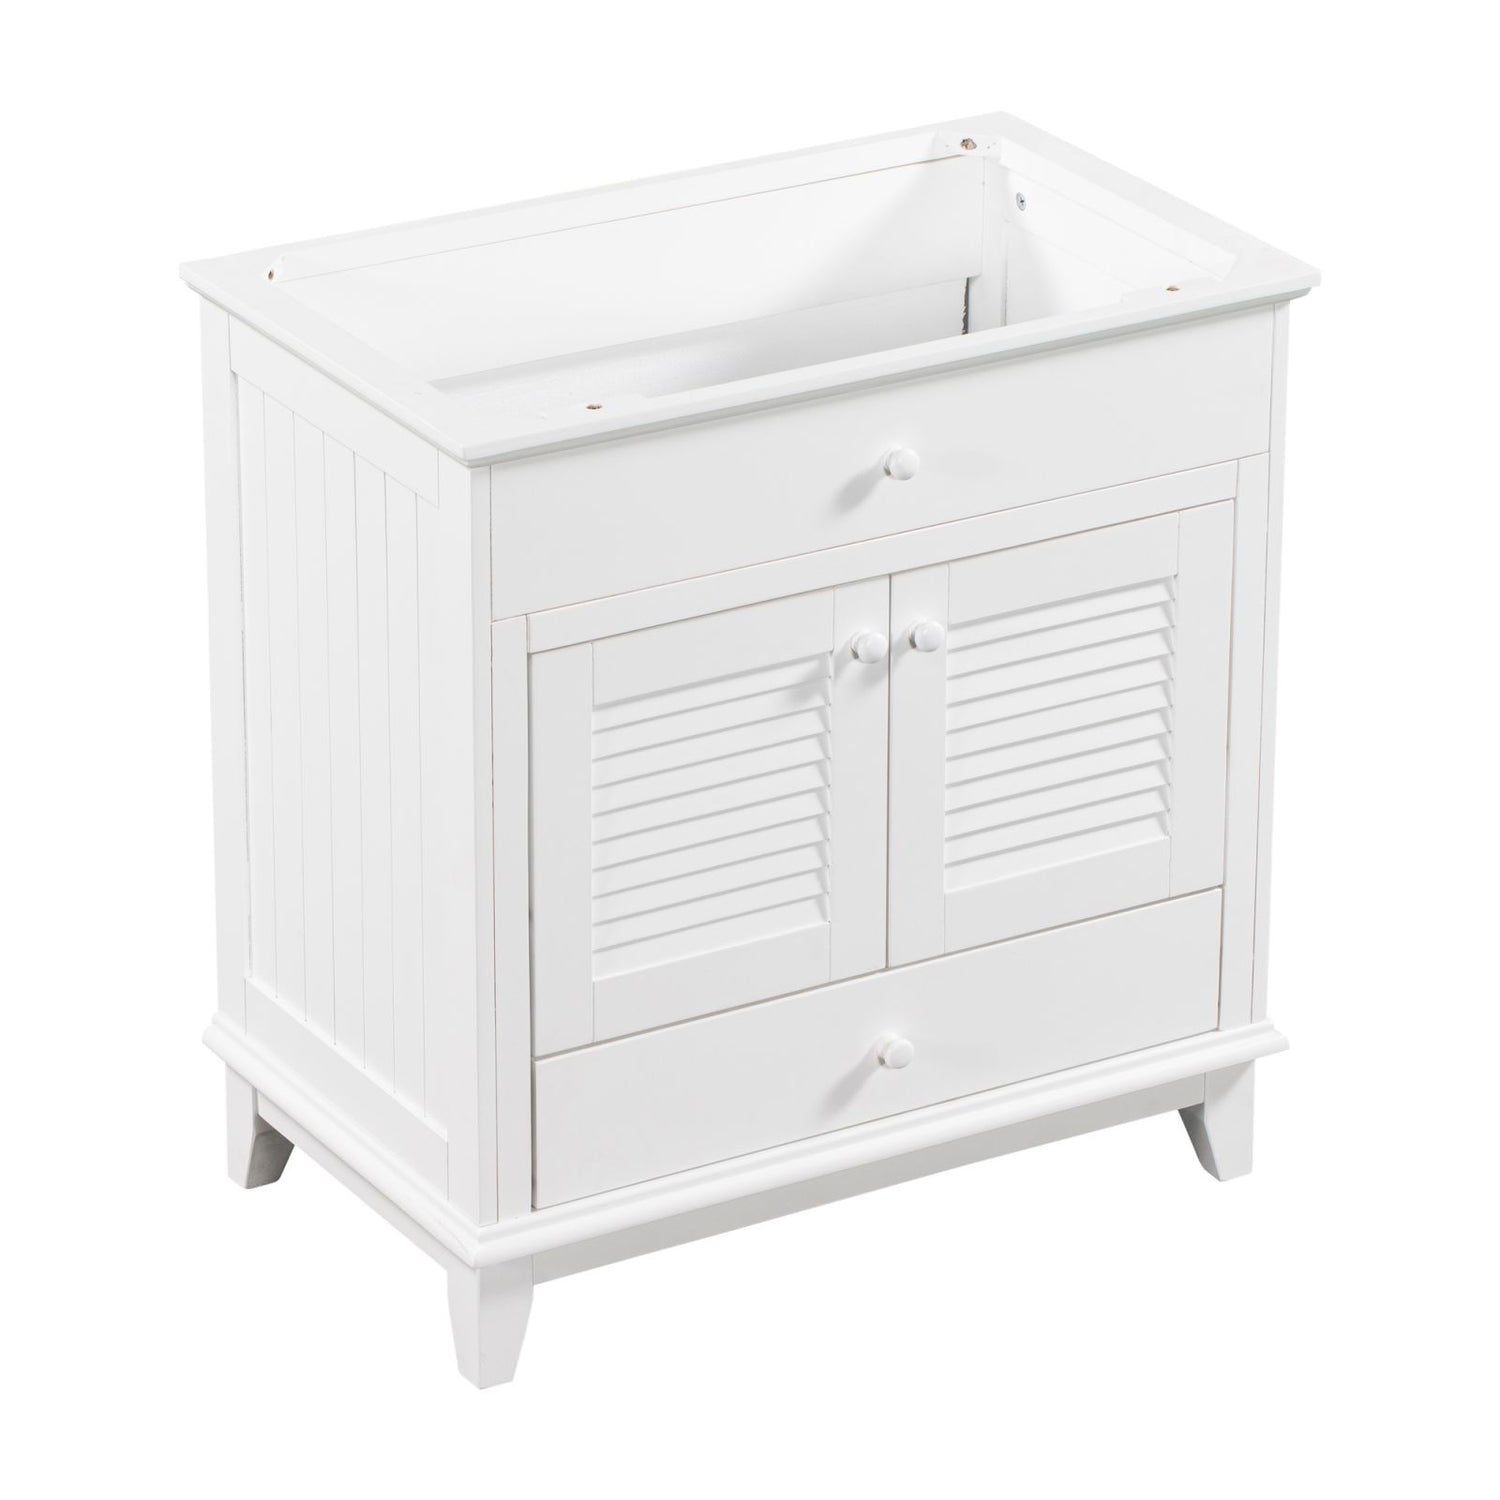 White wooden bathroom cabinet without sink